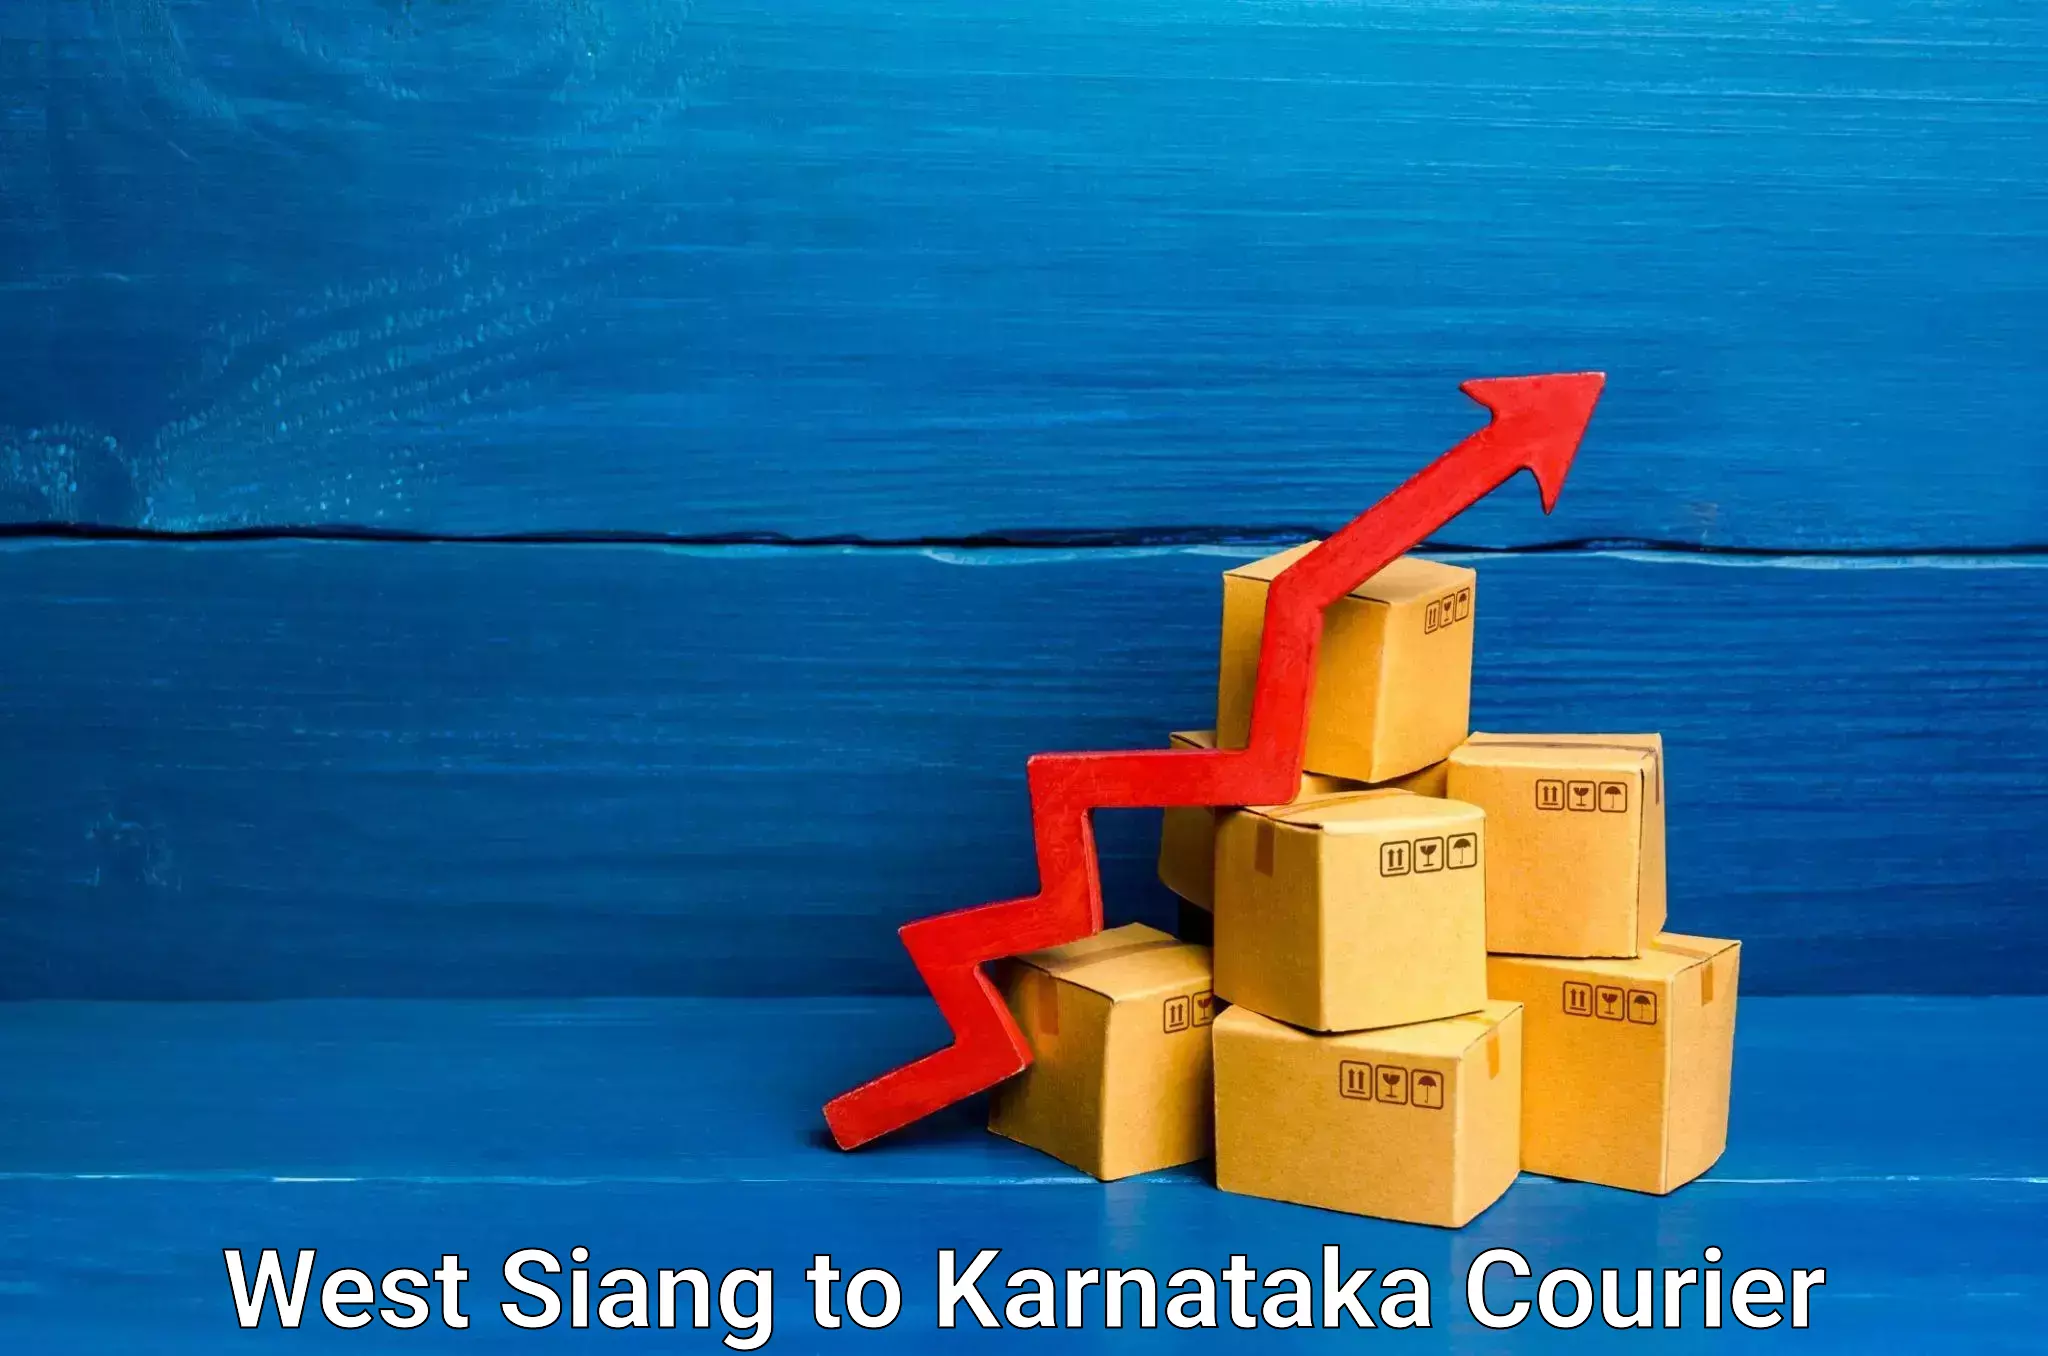 User-friendly delivery service West Siang to Kolar